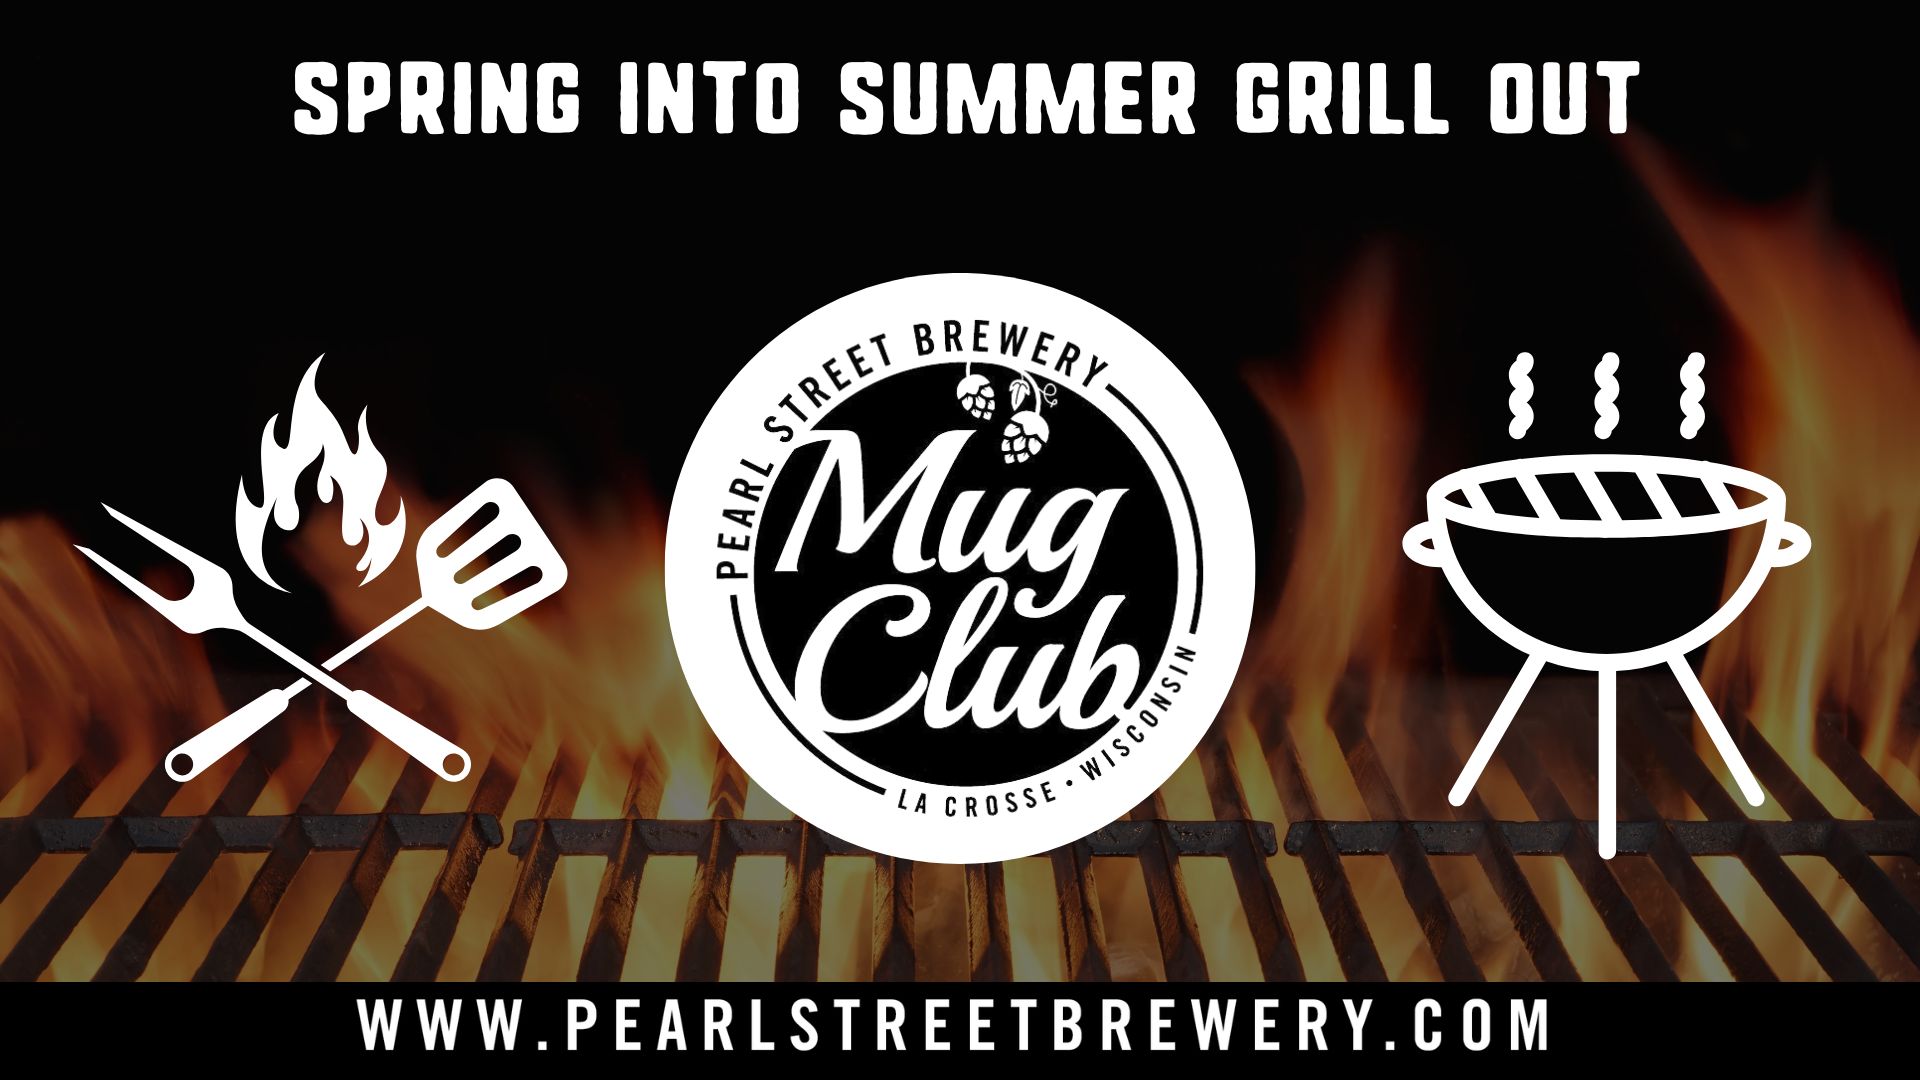 Spring into Summer Grill Out!